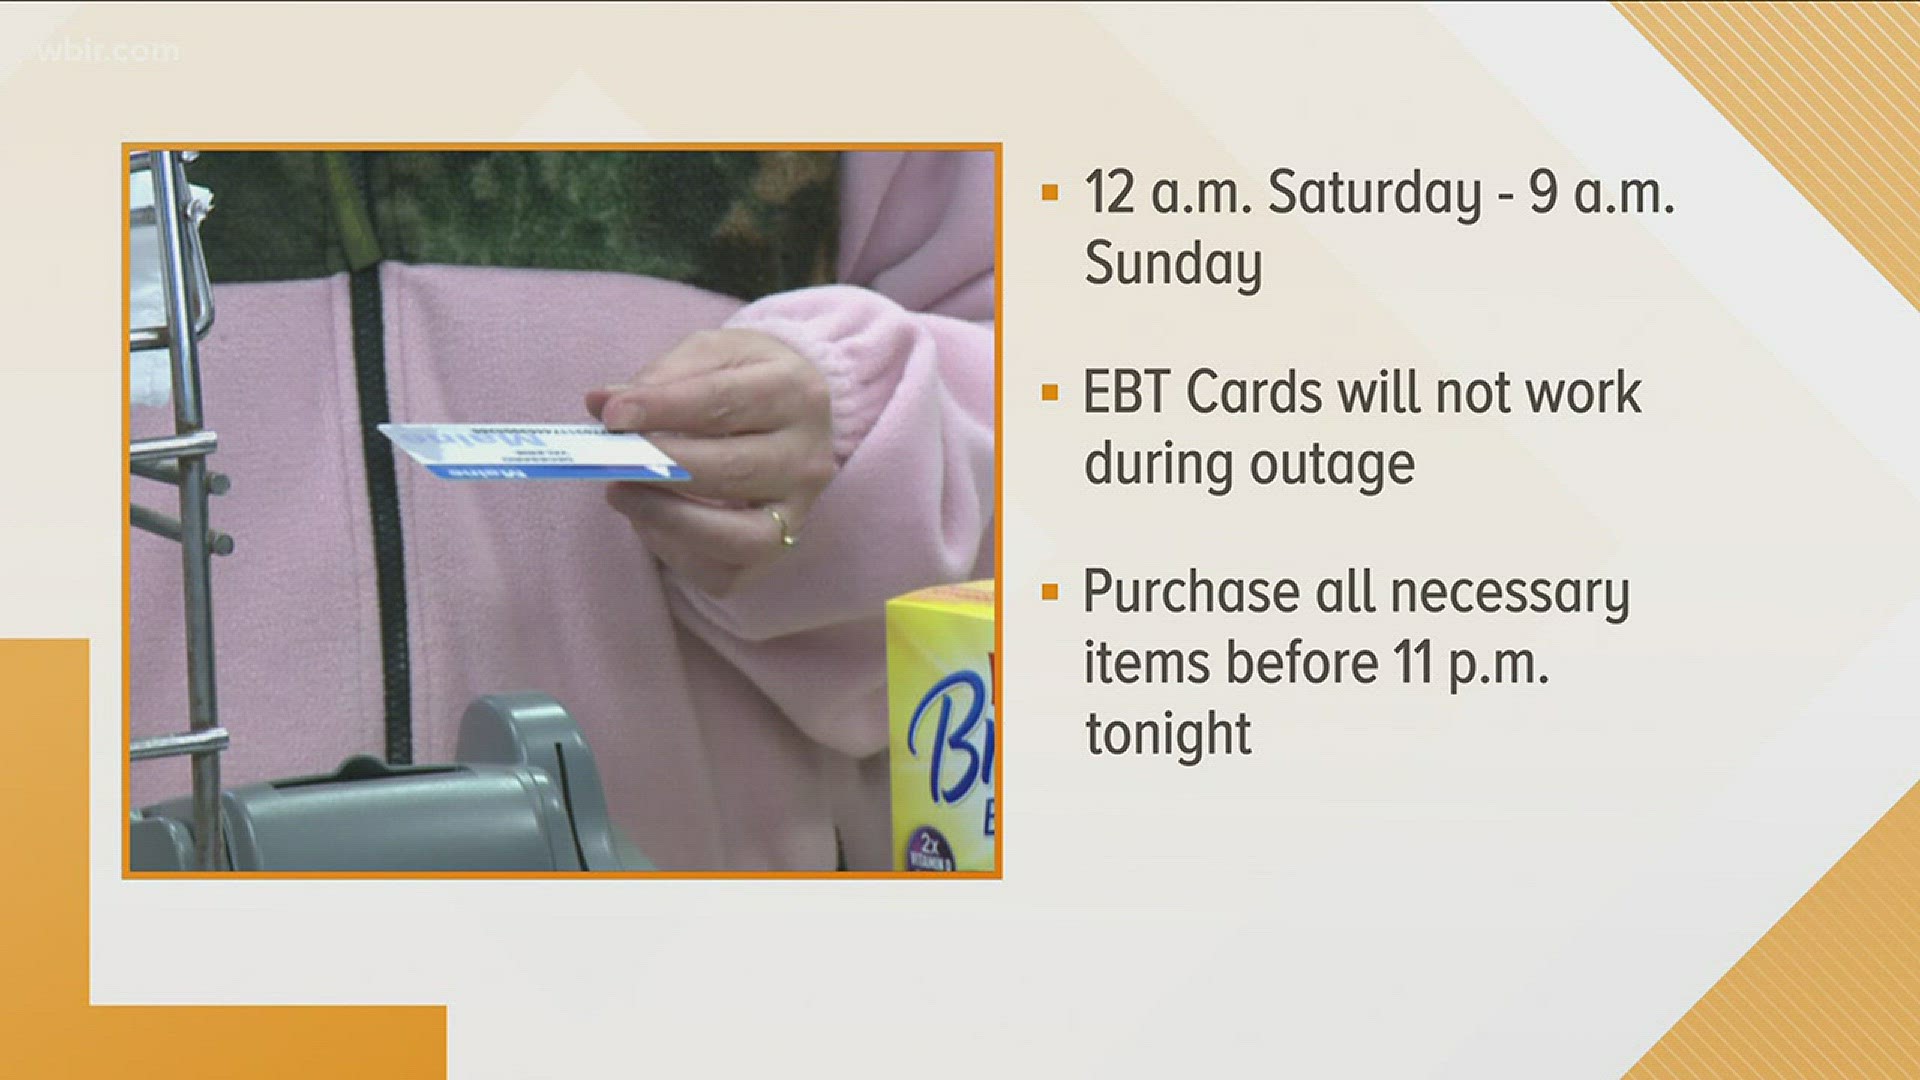 From 12 a.m. to 9 a.m. on Sunday, EBT cards will not work during the outage.